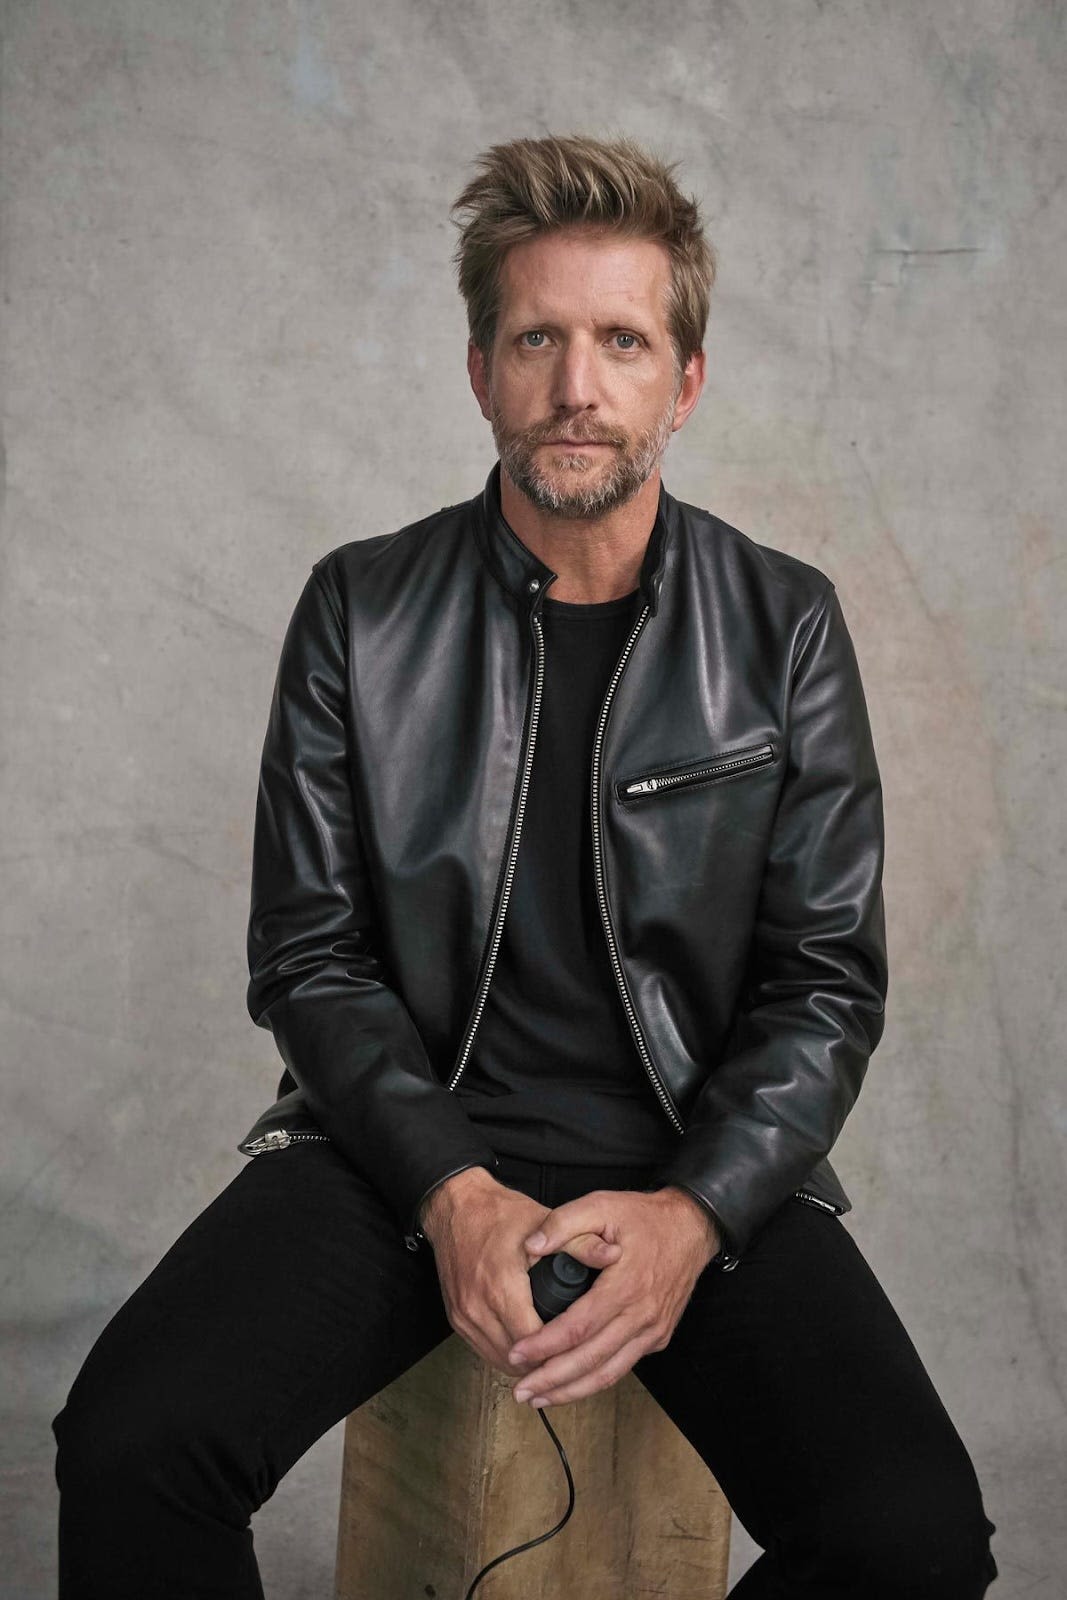 Actor Paul Sparks and producer Dylan Brodie to be named Oklahoma Film Icons at deadCenter